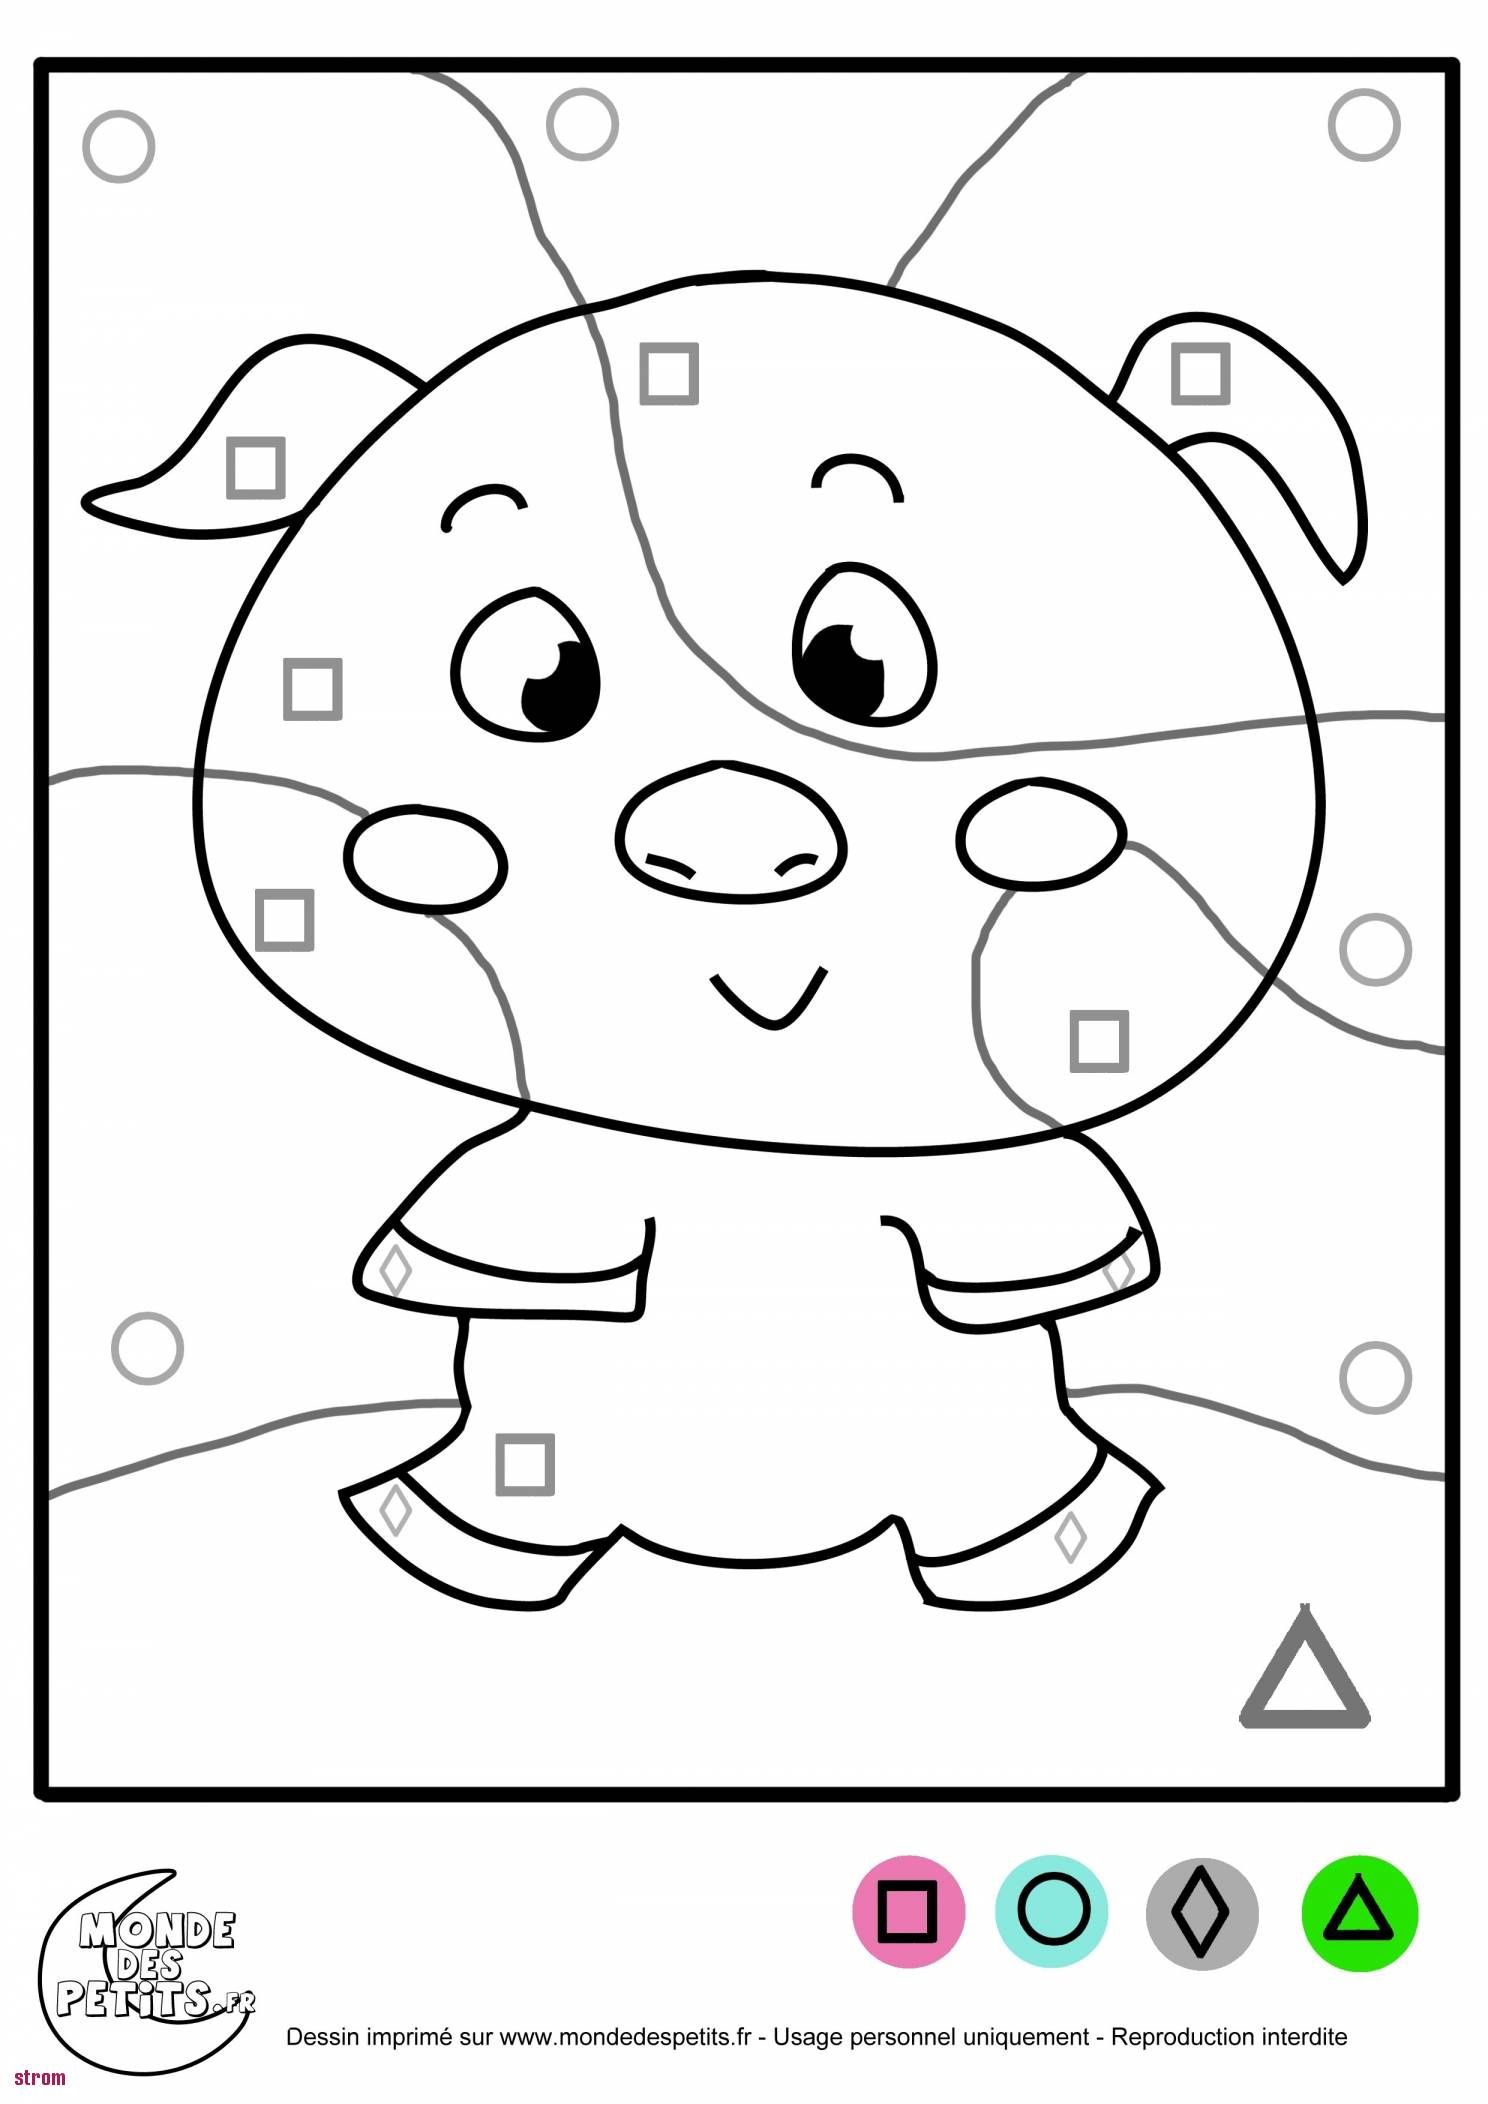 Coloriage maternelle moyenne section imprimer